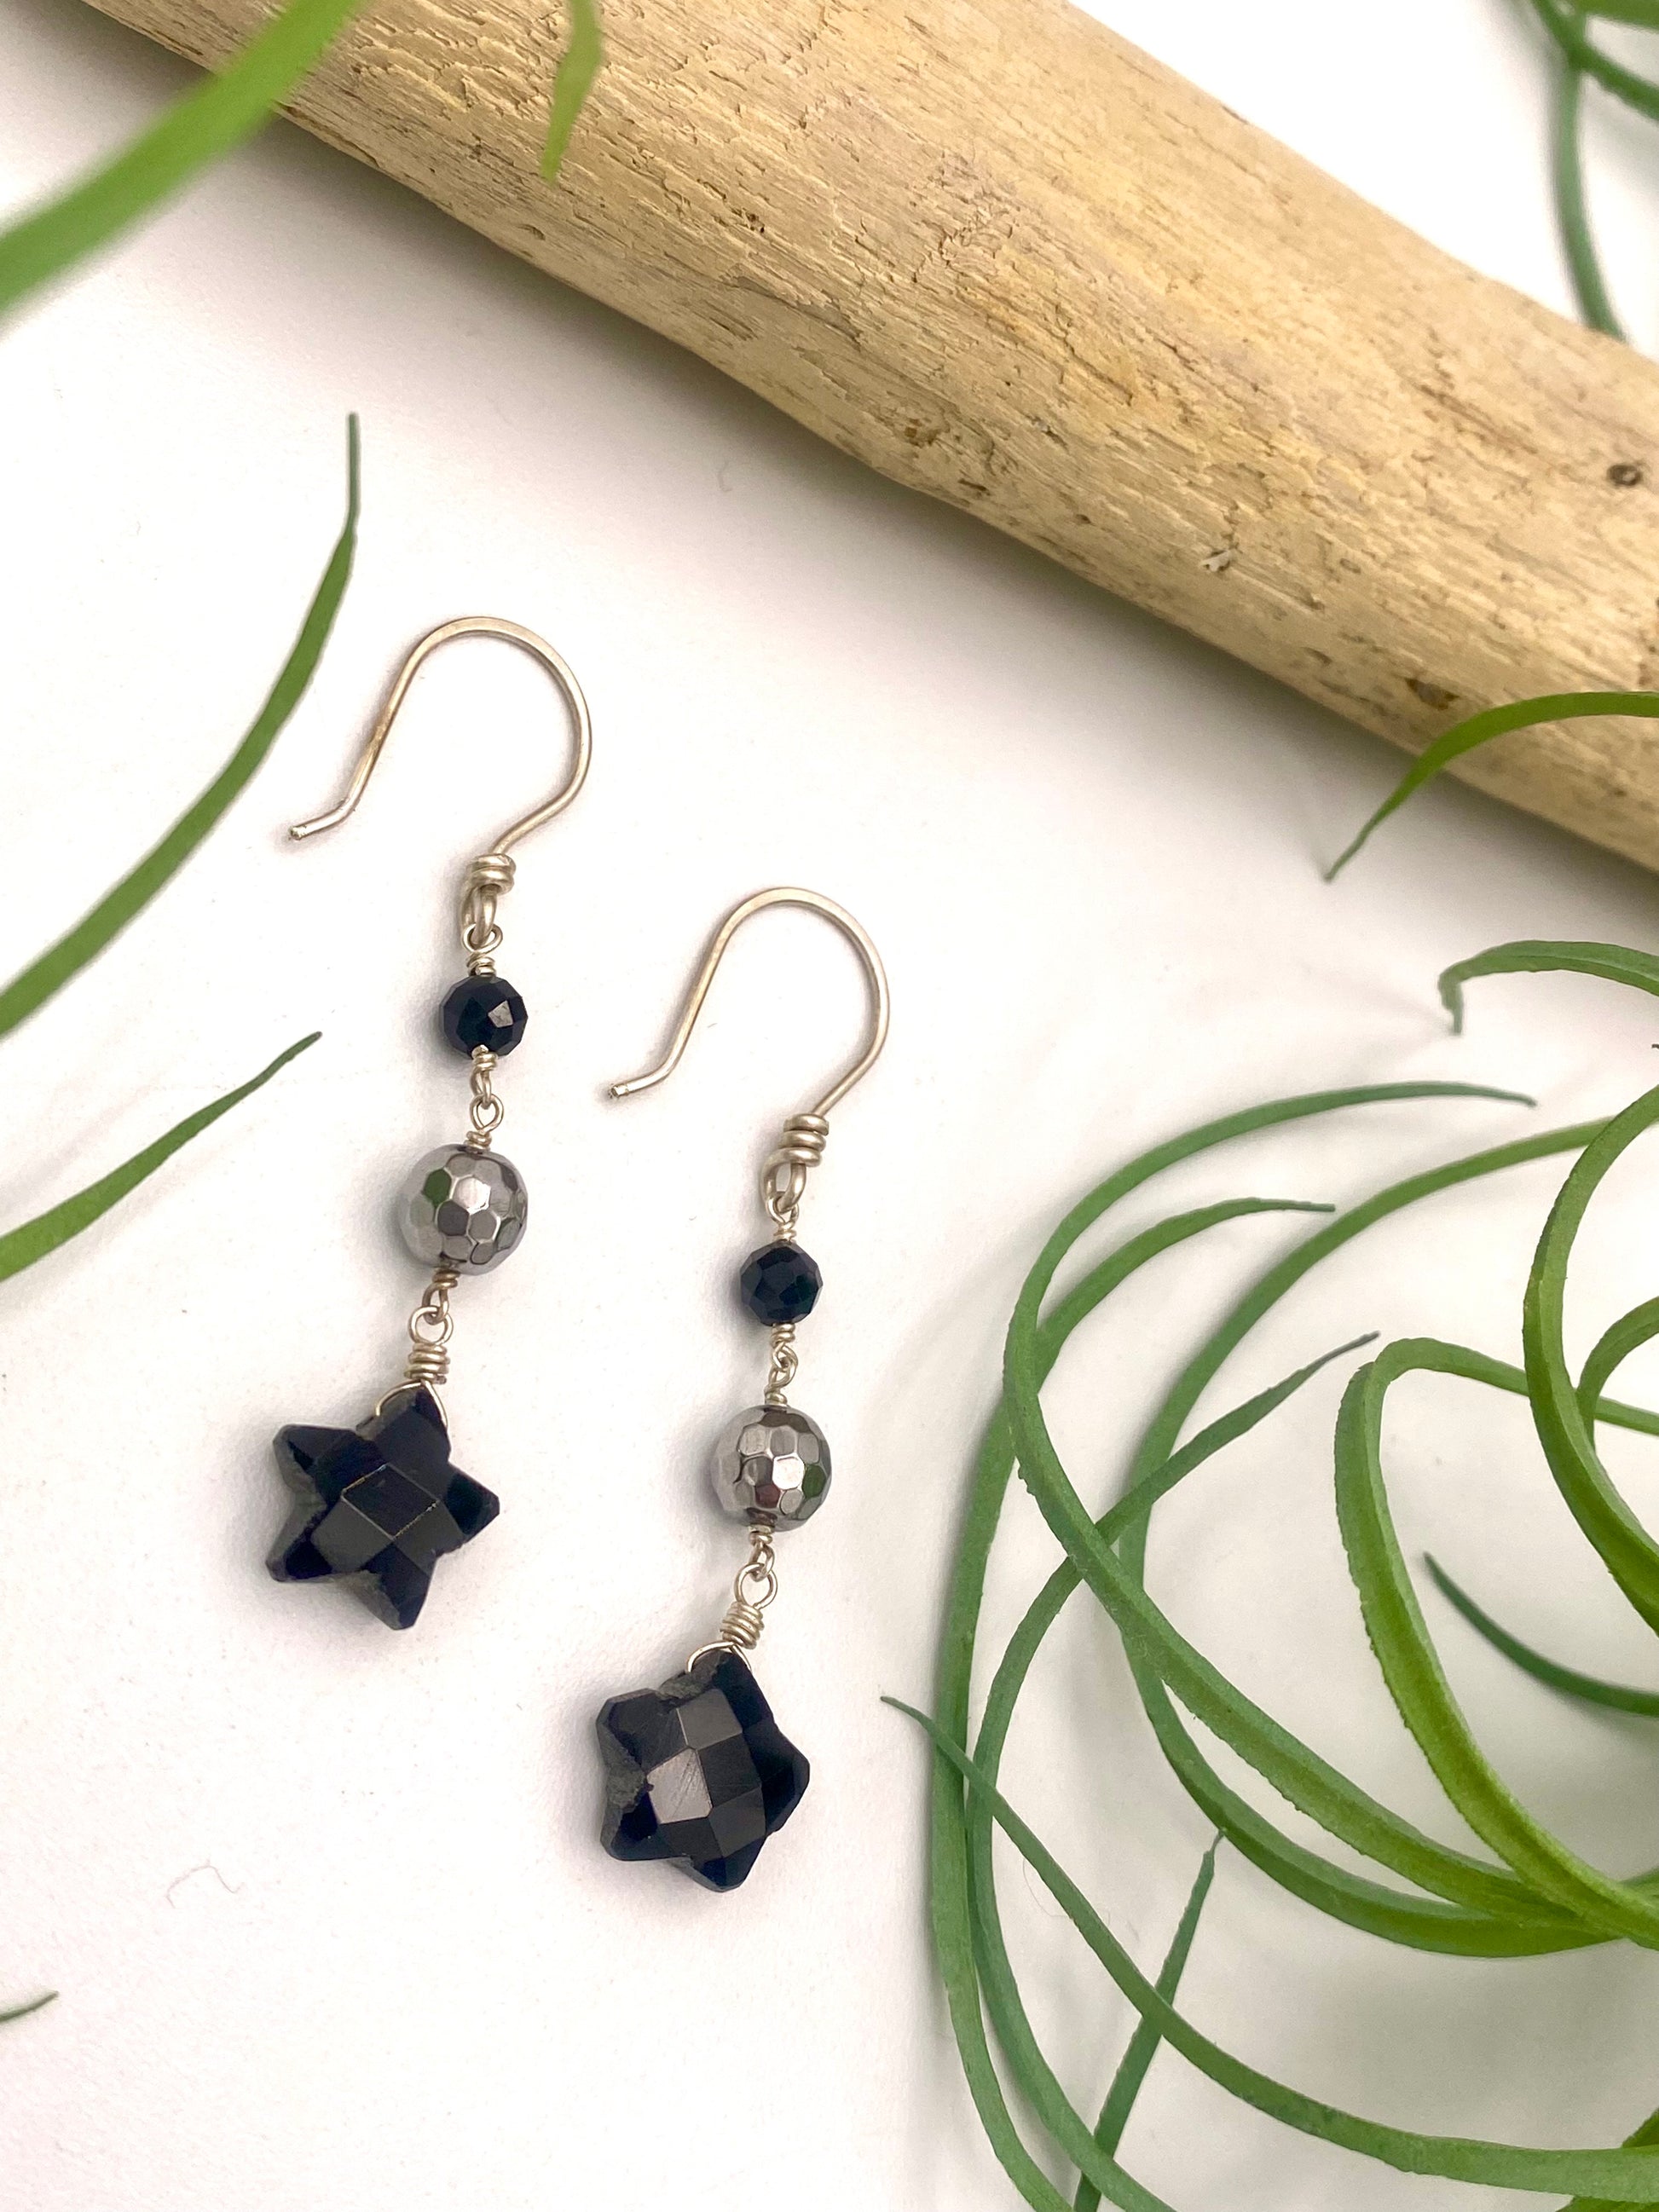 Black Onyx Gemstone Star Earrings with Silver Hematite and Black Beads